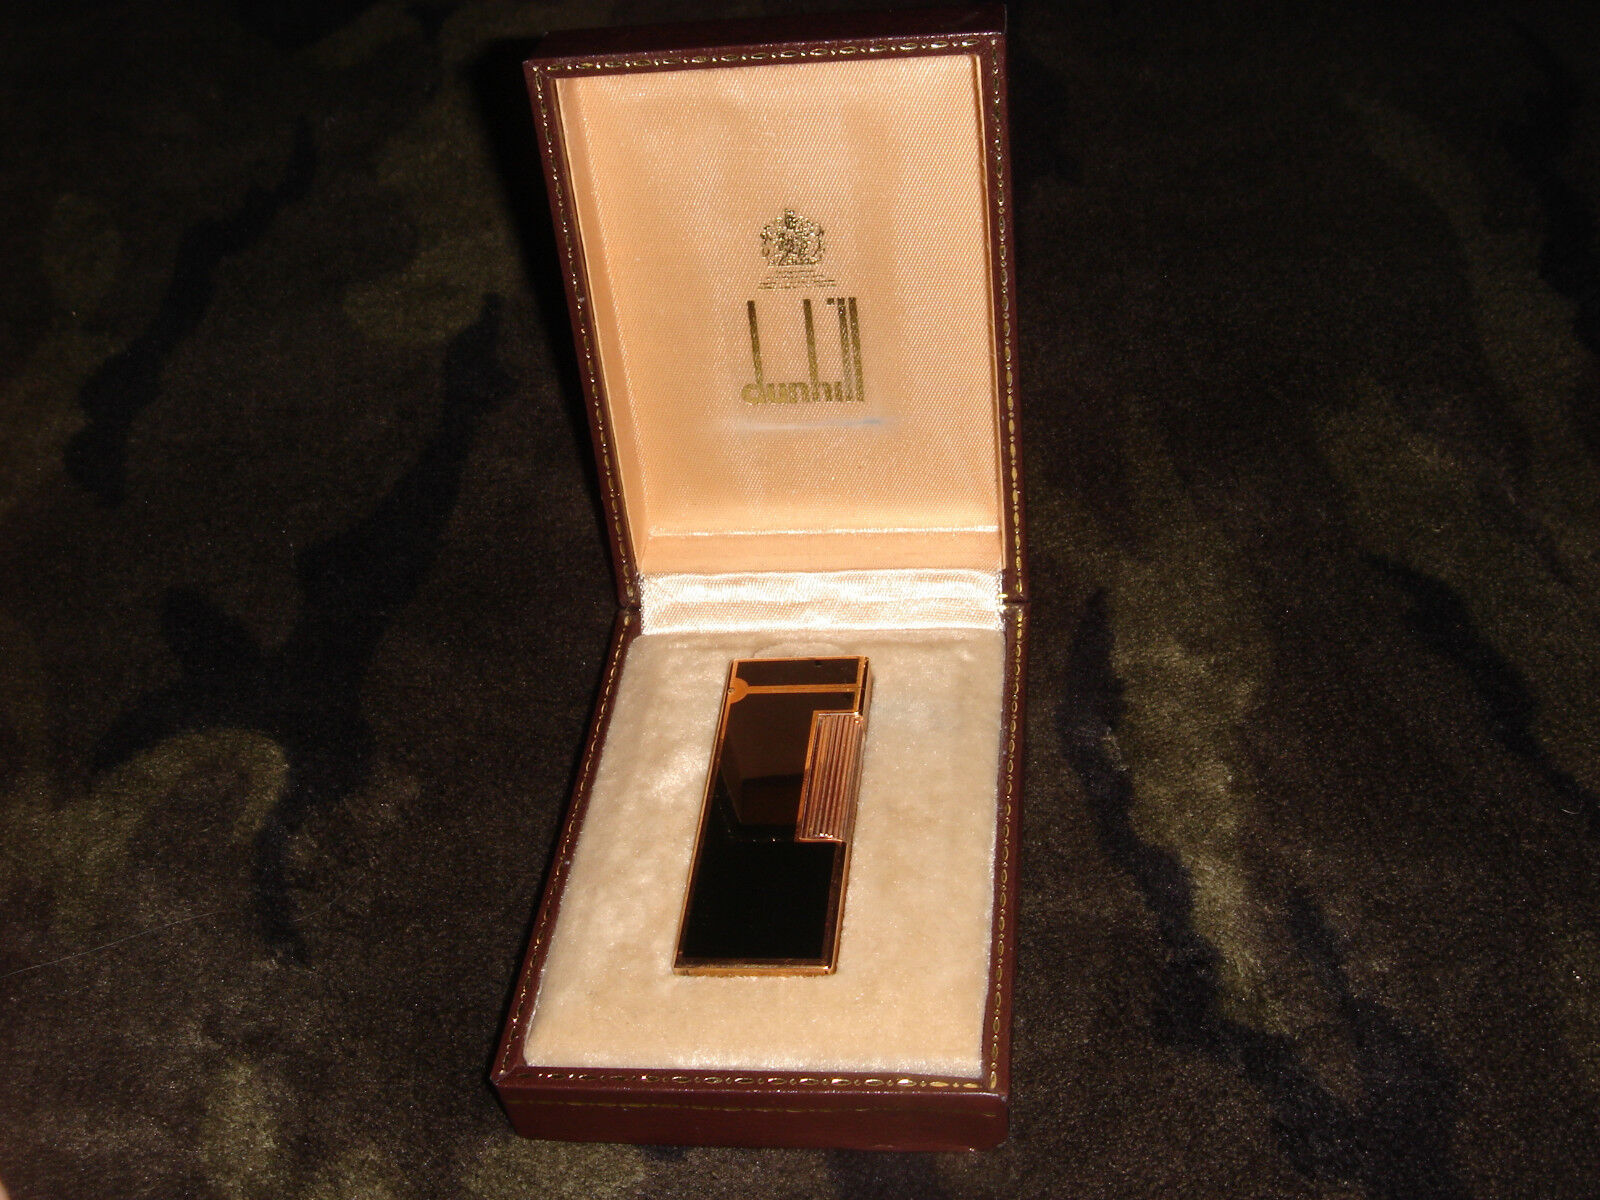 Vintage Black Lacquer Rollagas Dunhill Lighter in original box